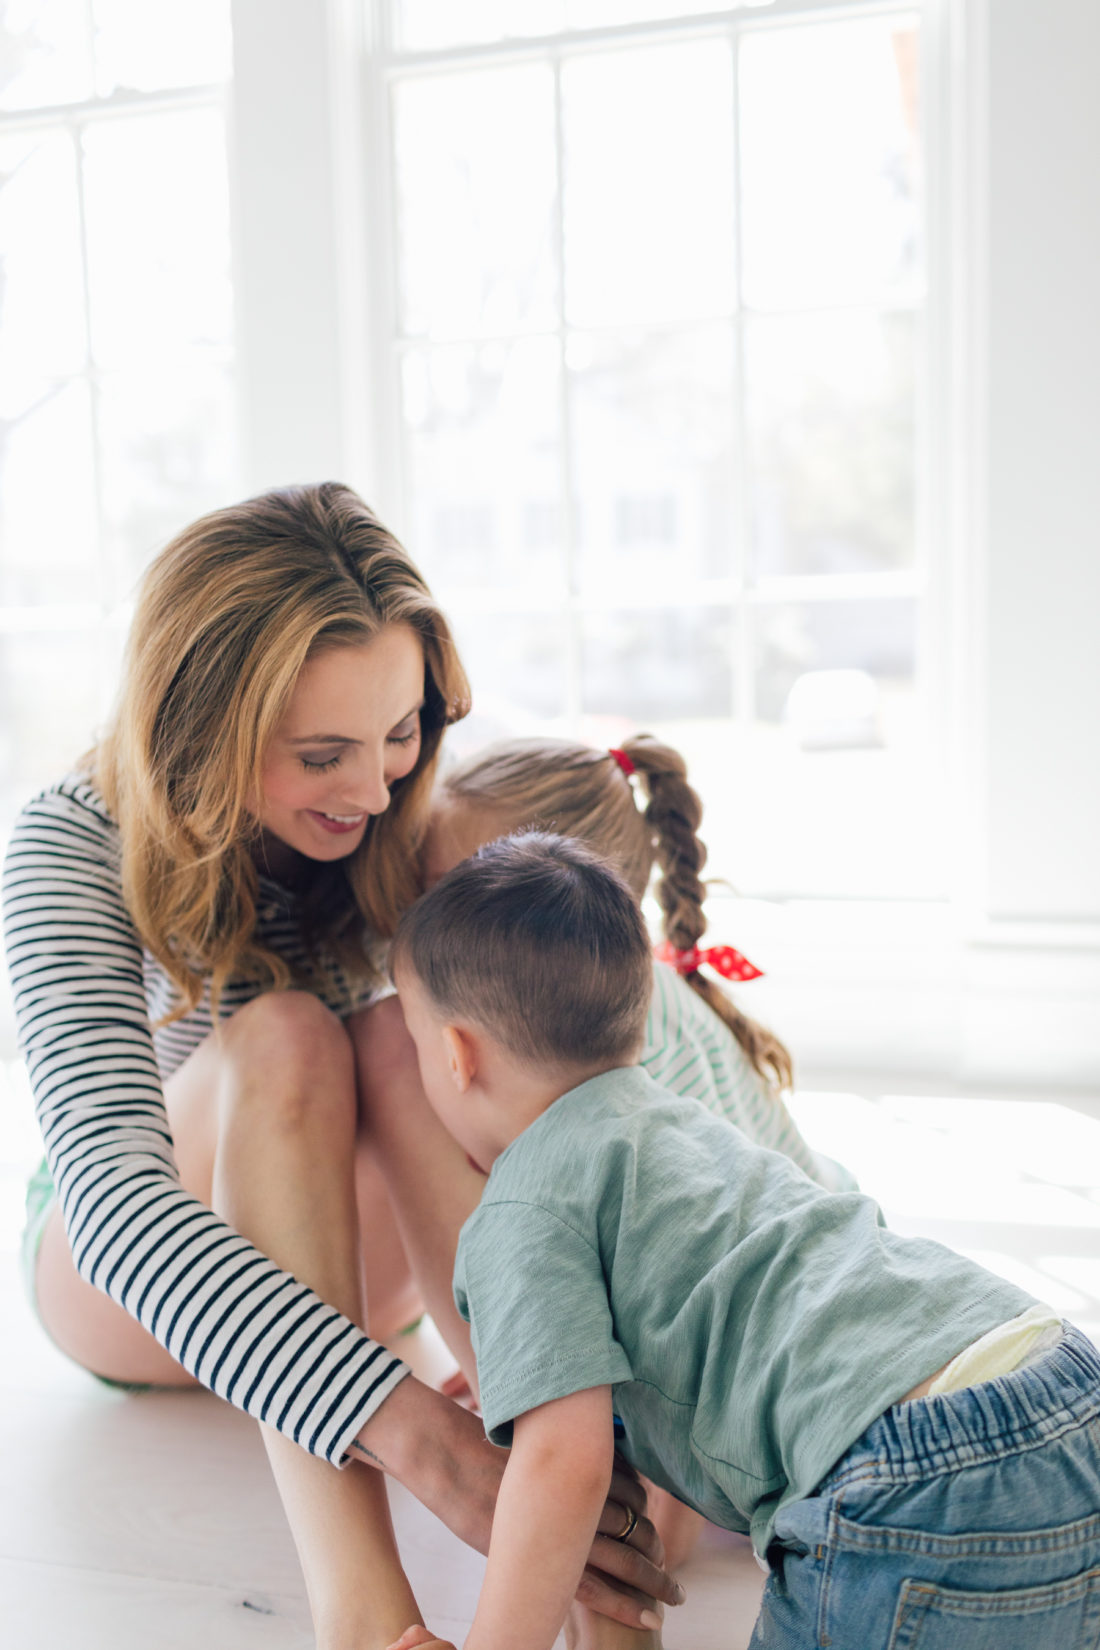 Eva Amurri Martino of Happily Eva After plays with her kids Marlowe and Major on the floor of their new home in Connecticut